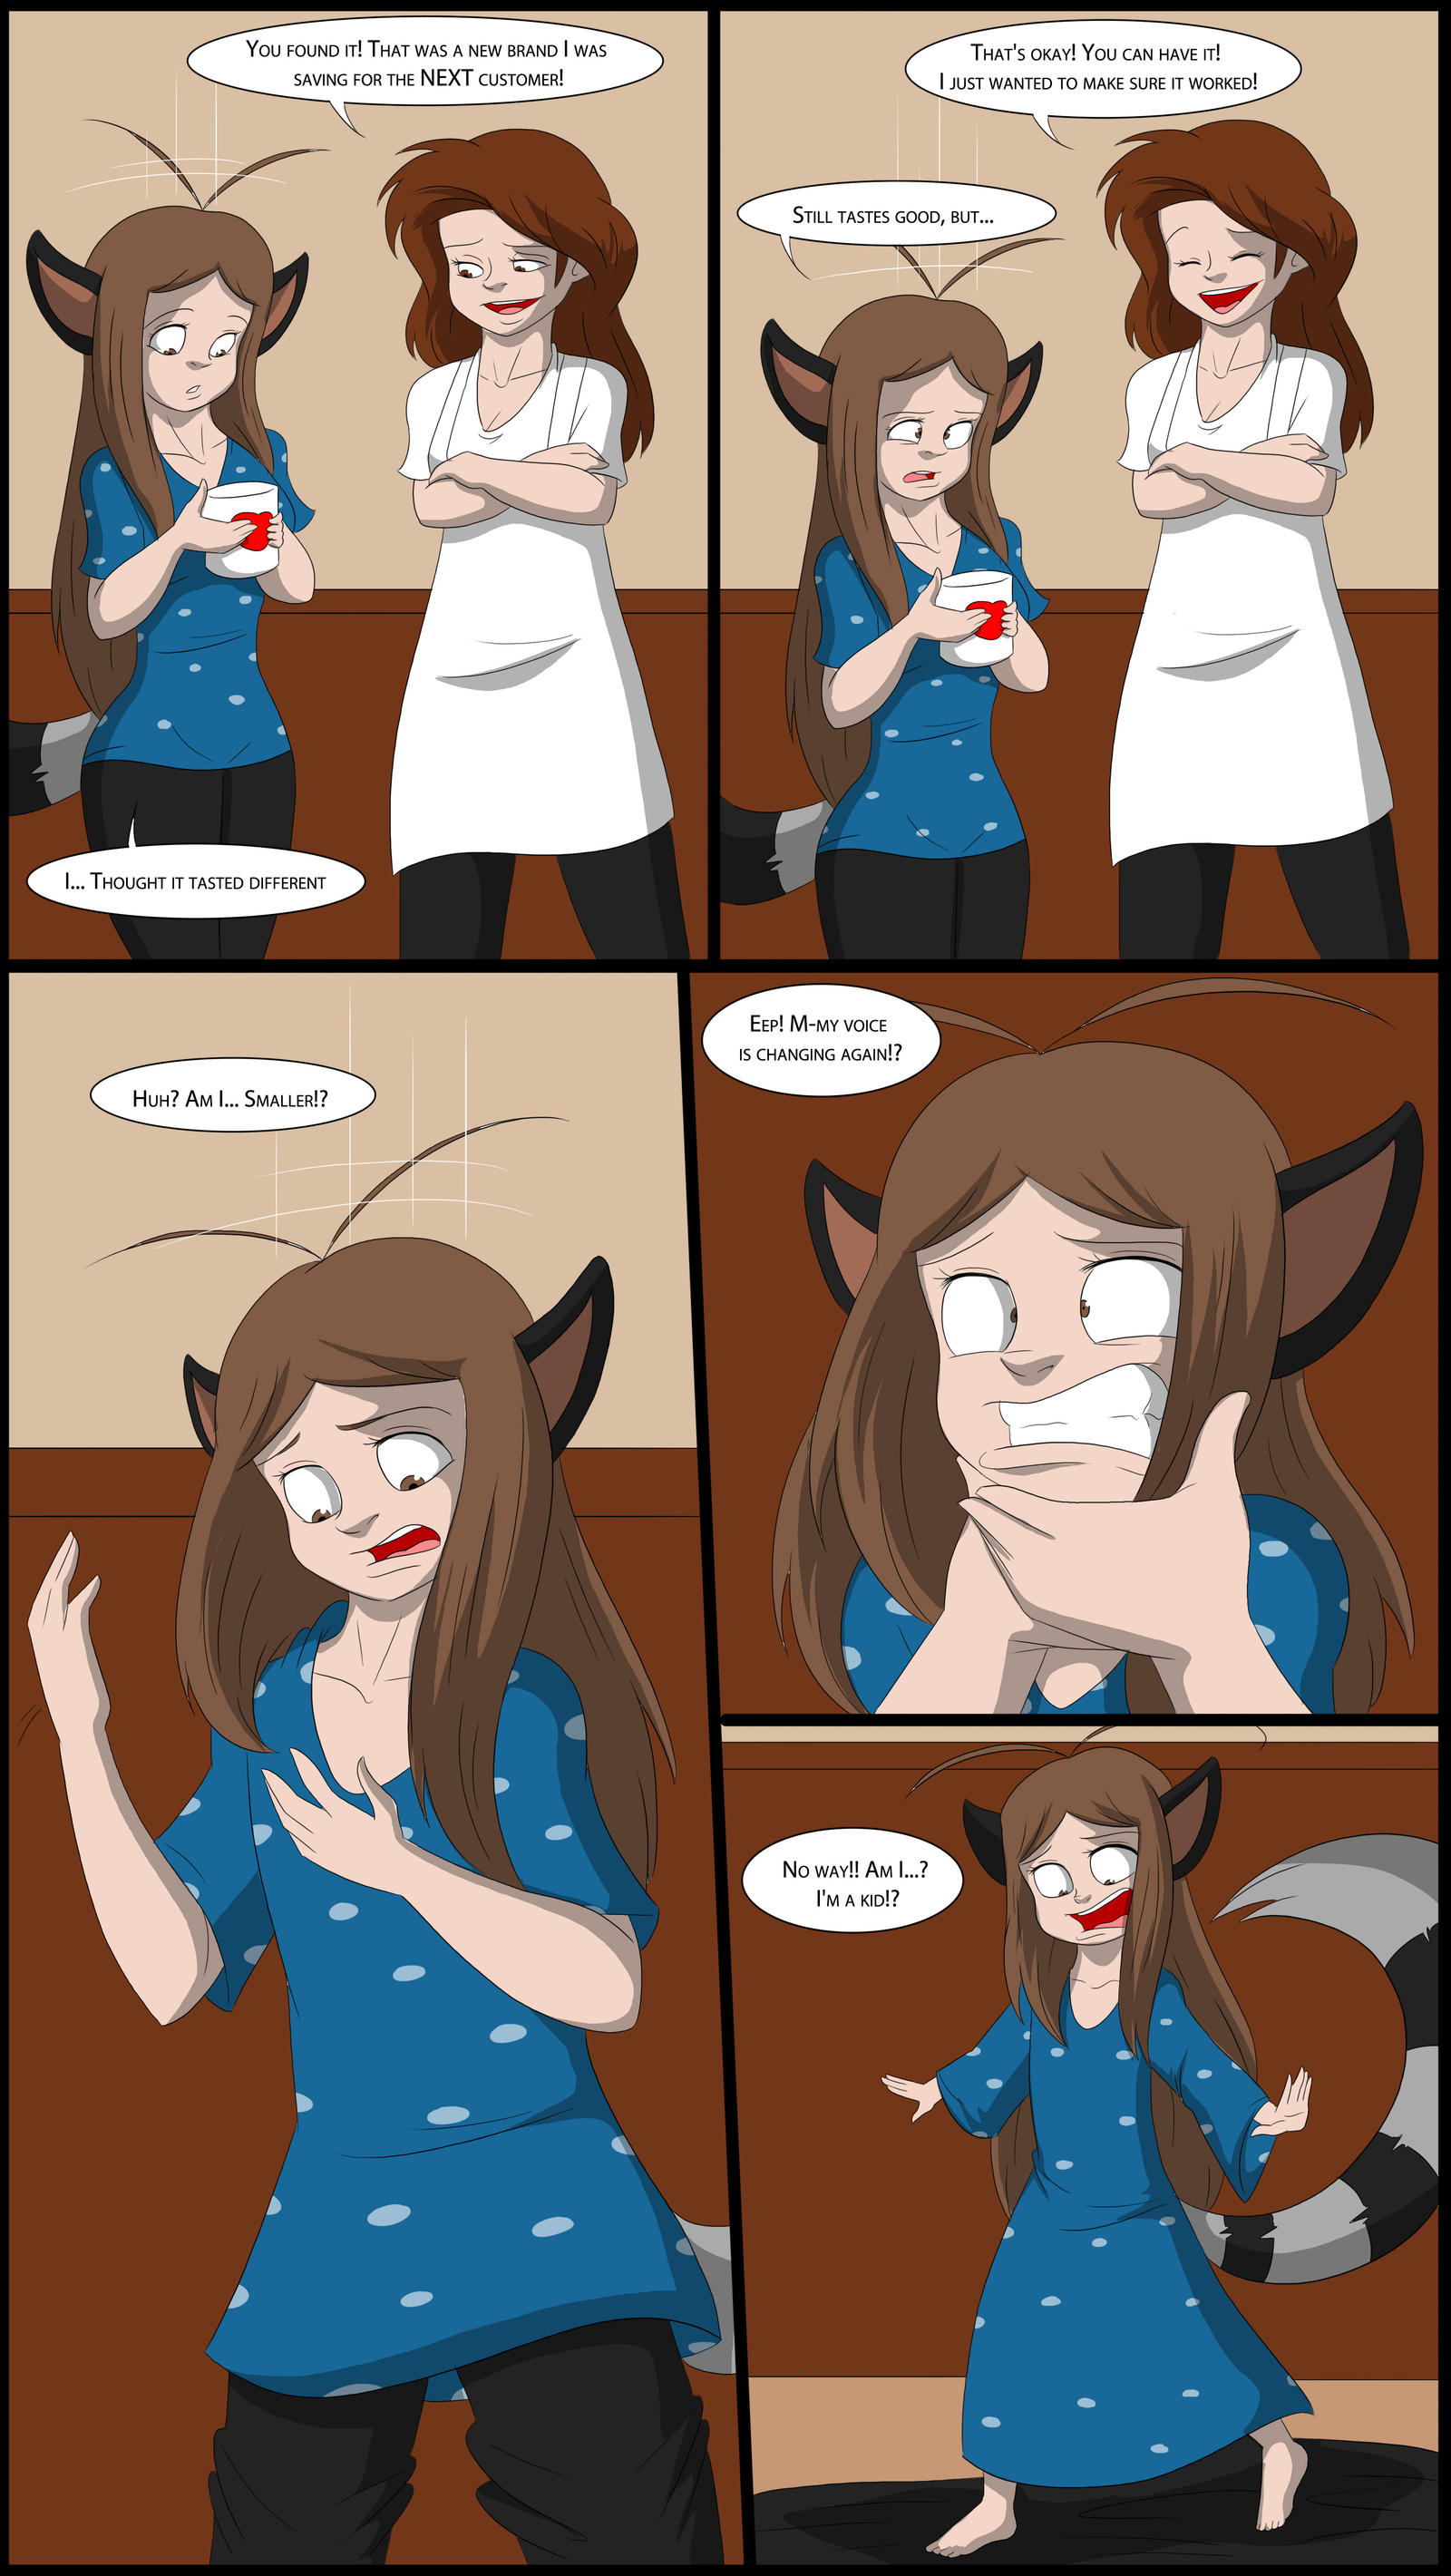 Coffee Shop Girl TG/TF/AR Page 5 by TFSubmissions on DeviantArt